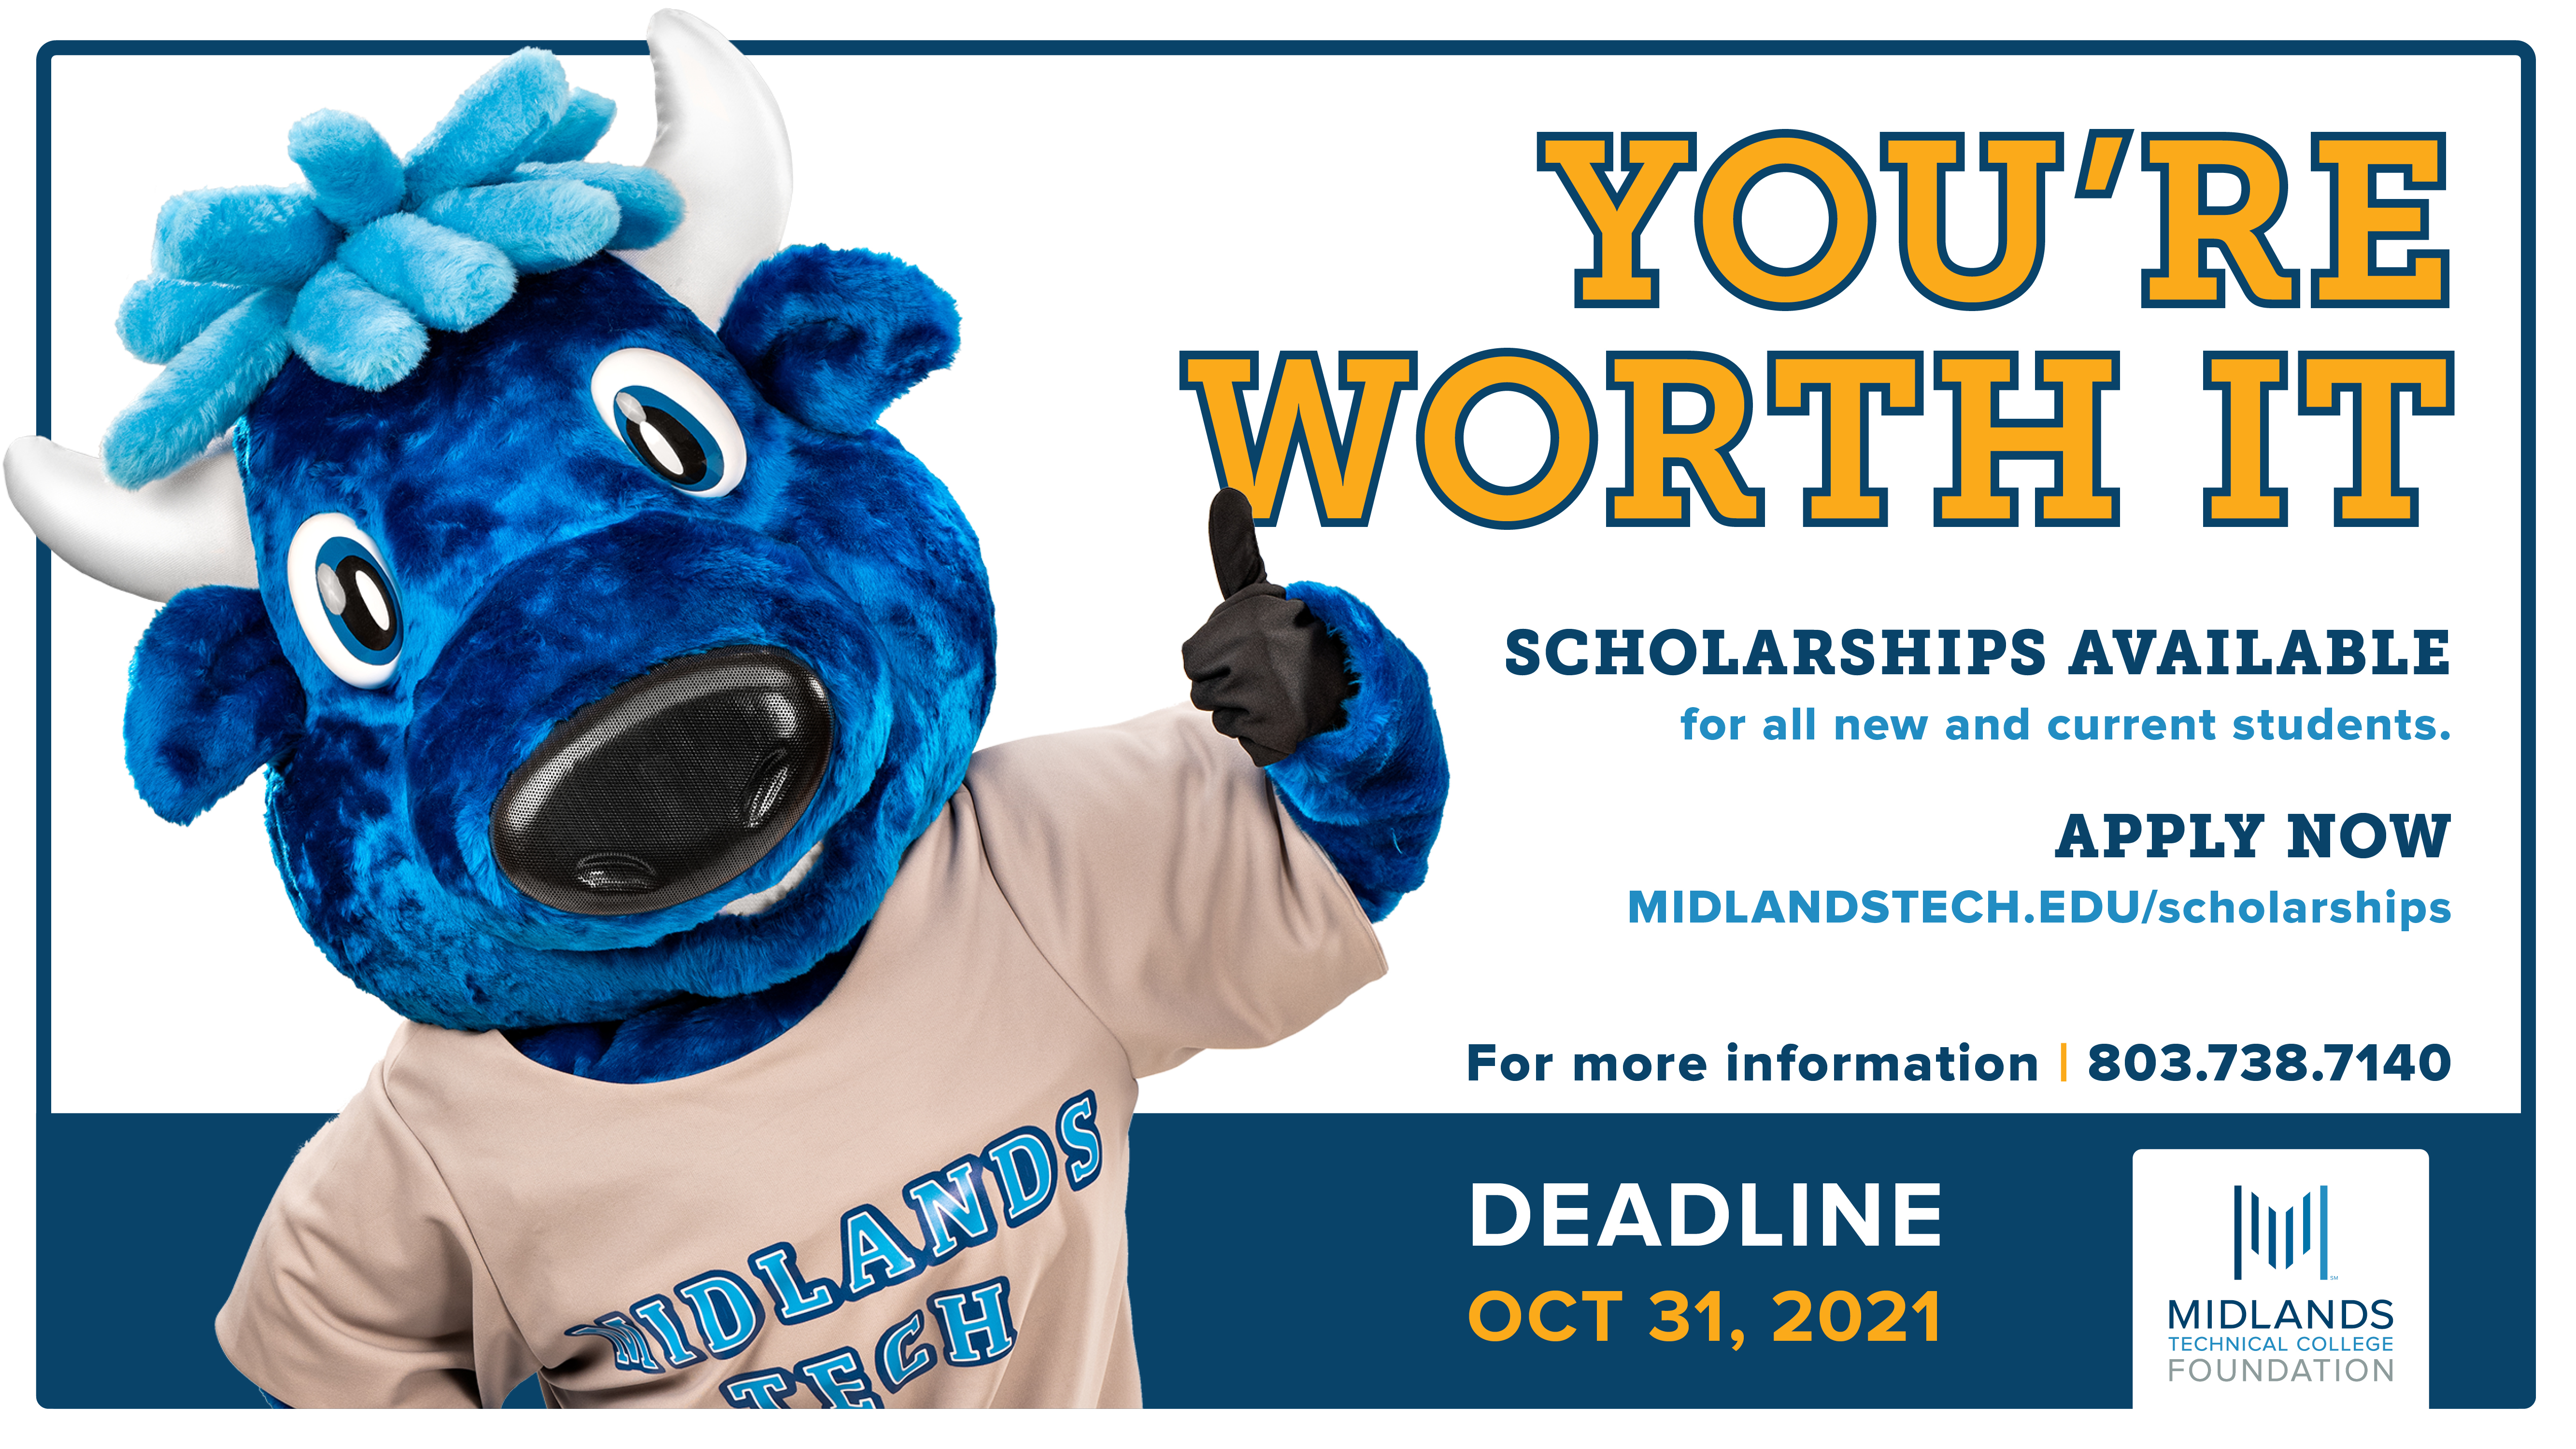 You're worth it. Let us invest in you and apply for an MTC scholarship by Oct. 31.